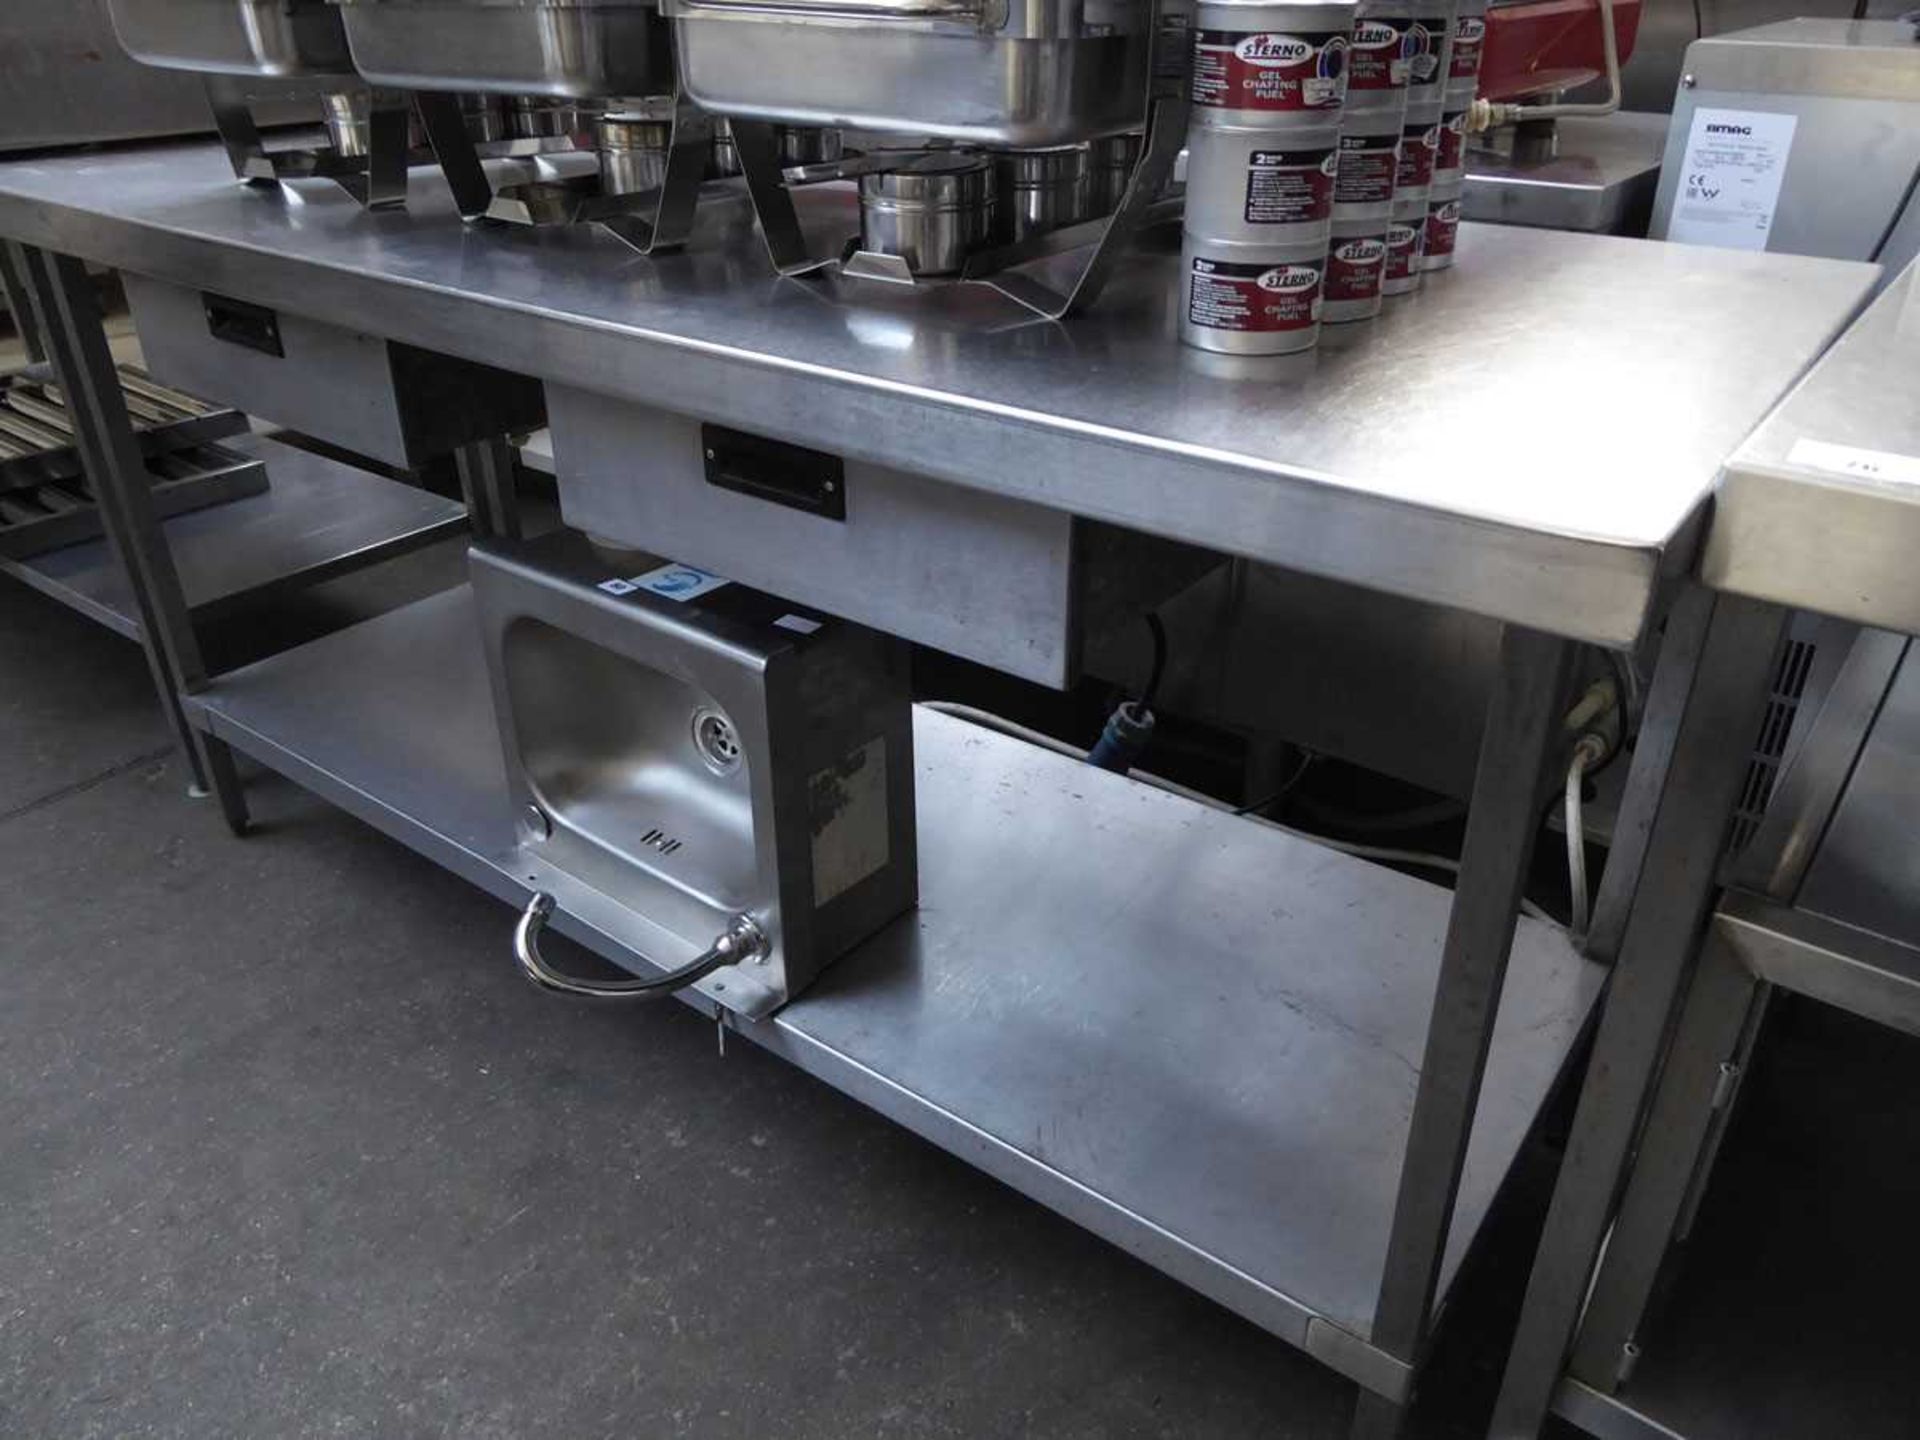 +VAT 176cm stainless steel preparation table with shelf and 2 drawers under